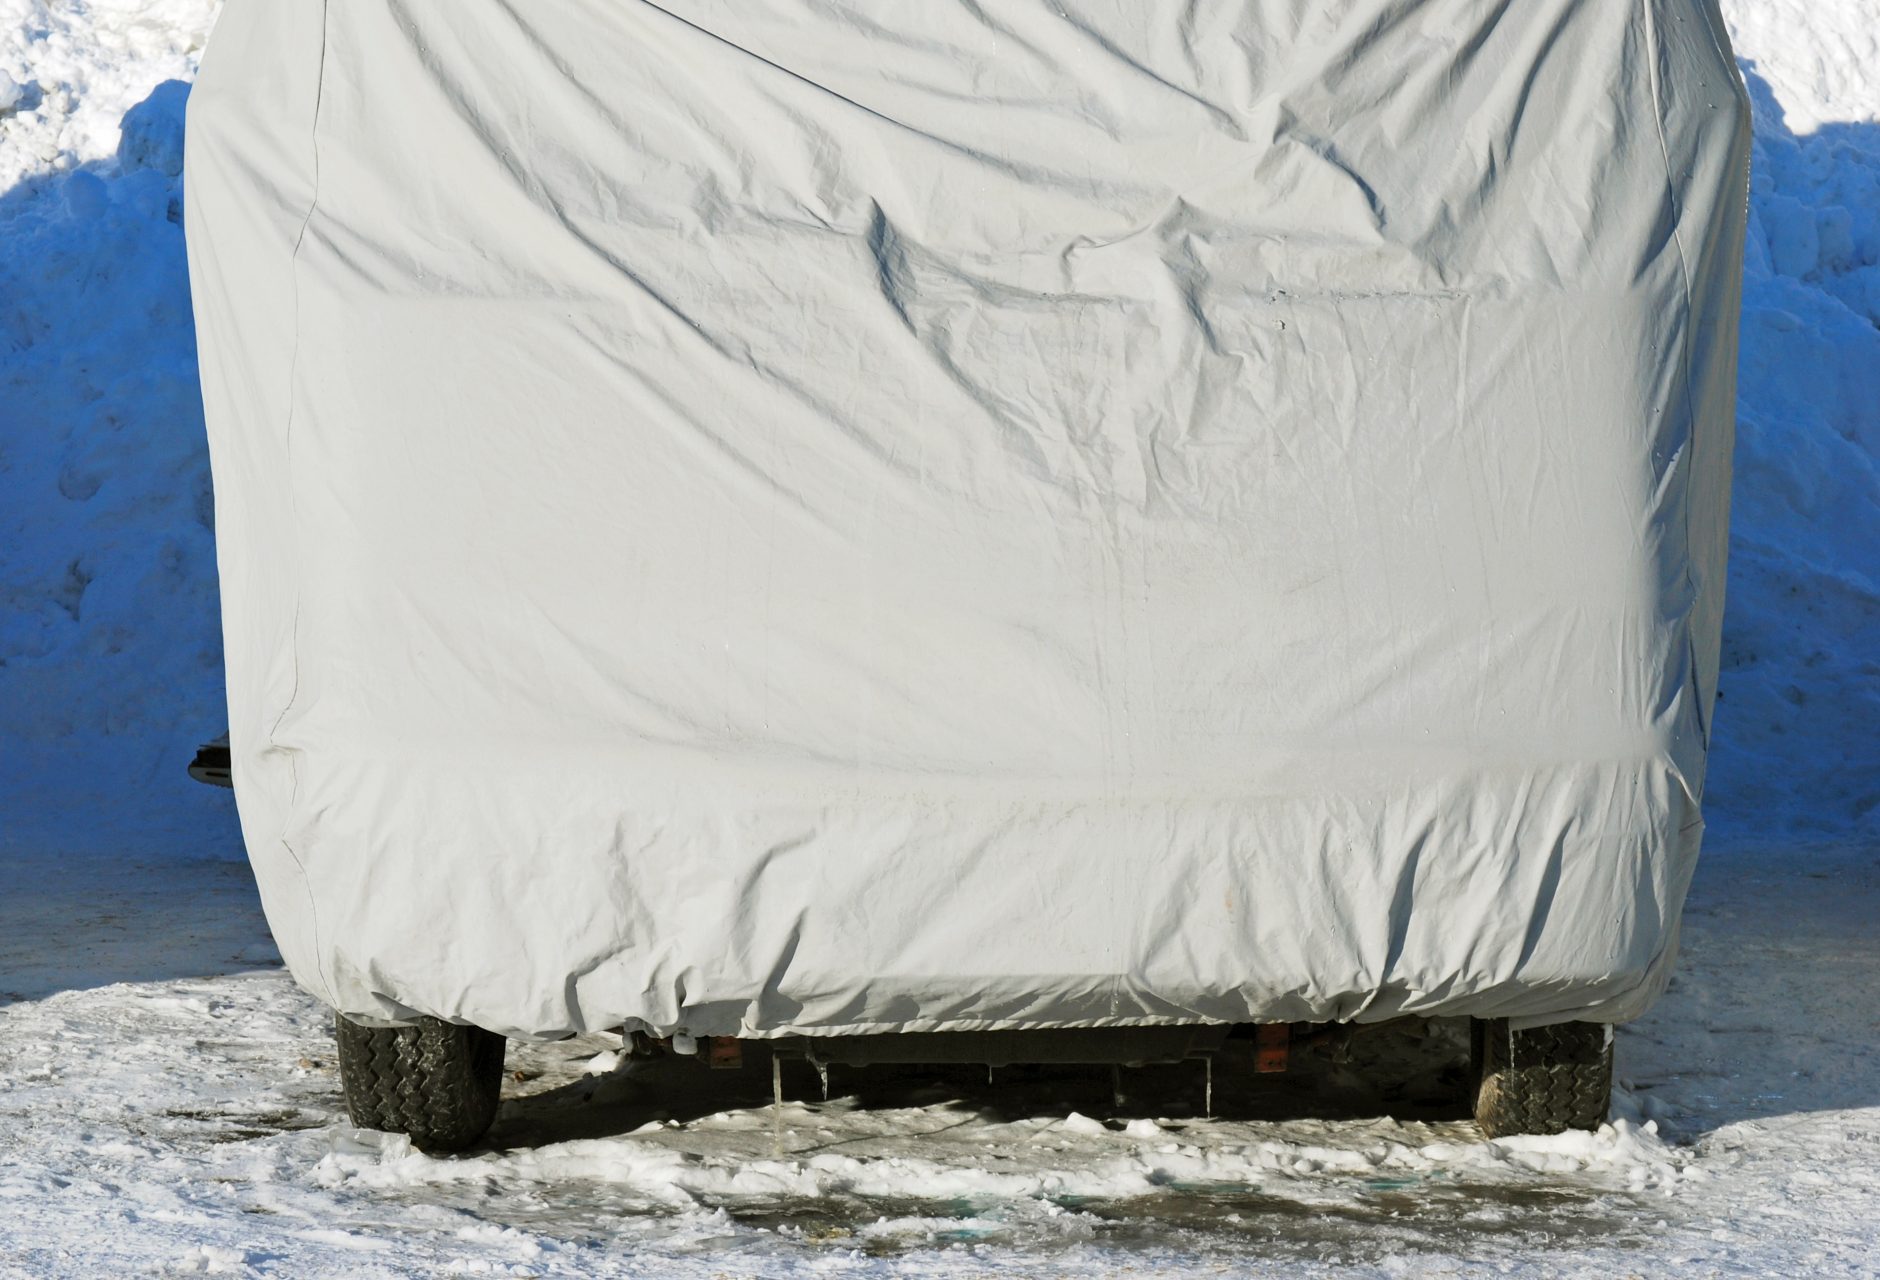 Why Should I Consider Using an RV Cover? - Grove RV